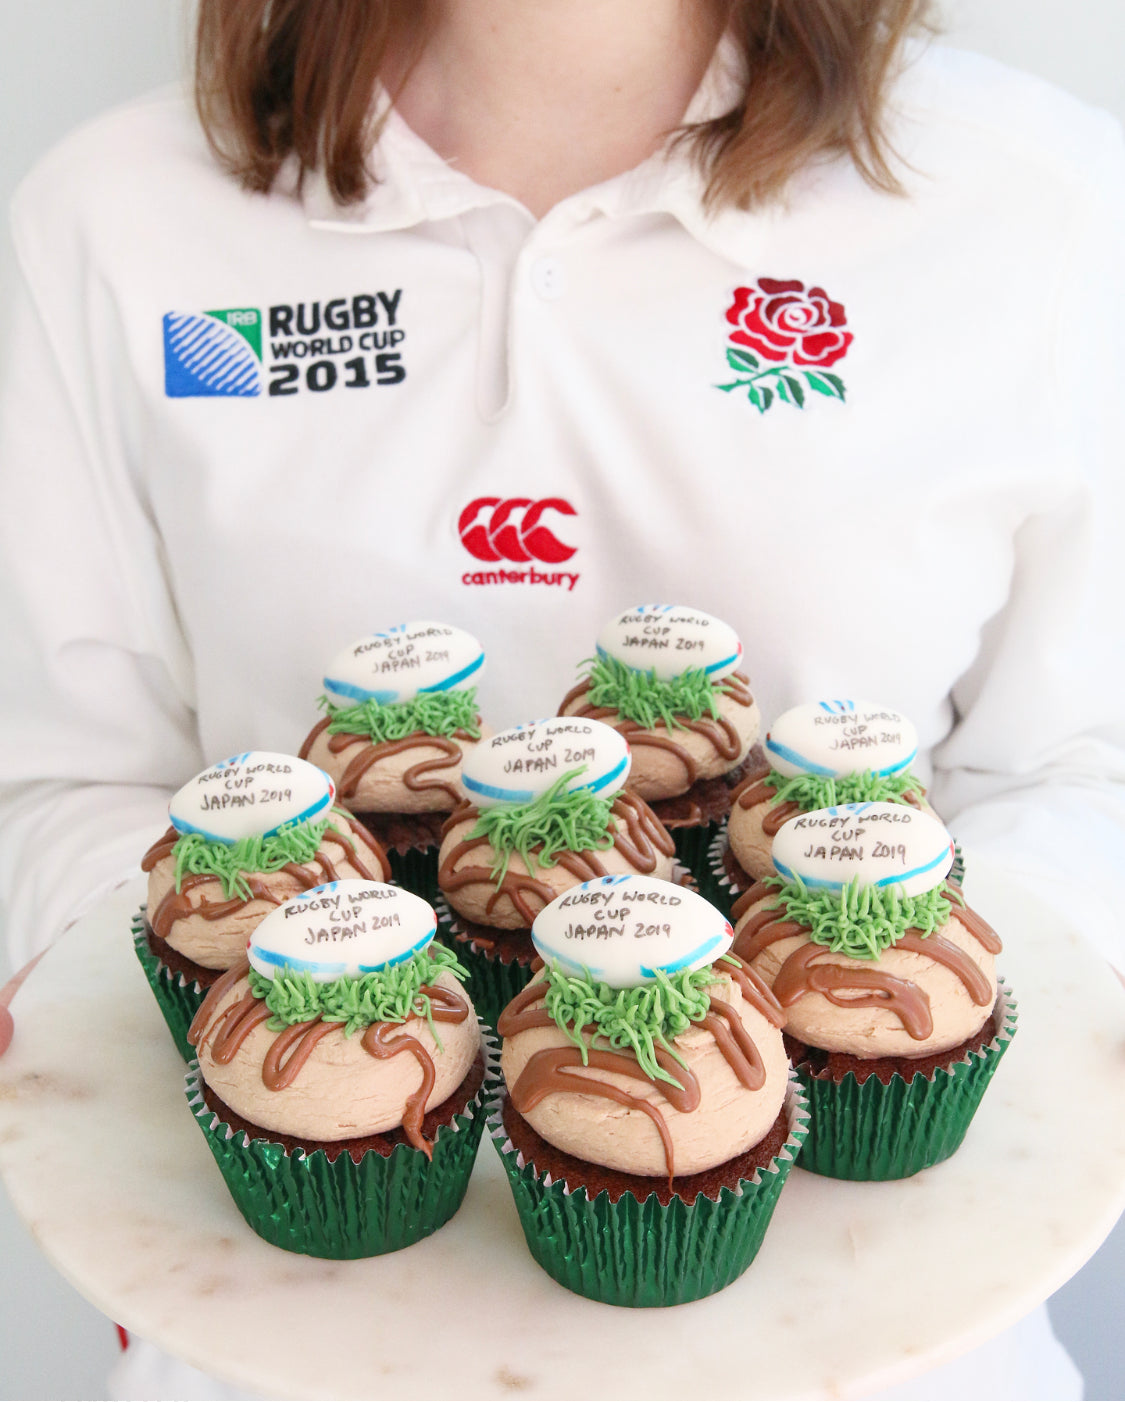 Rugby World Cup Cakes